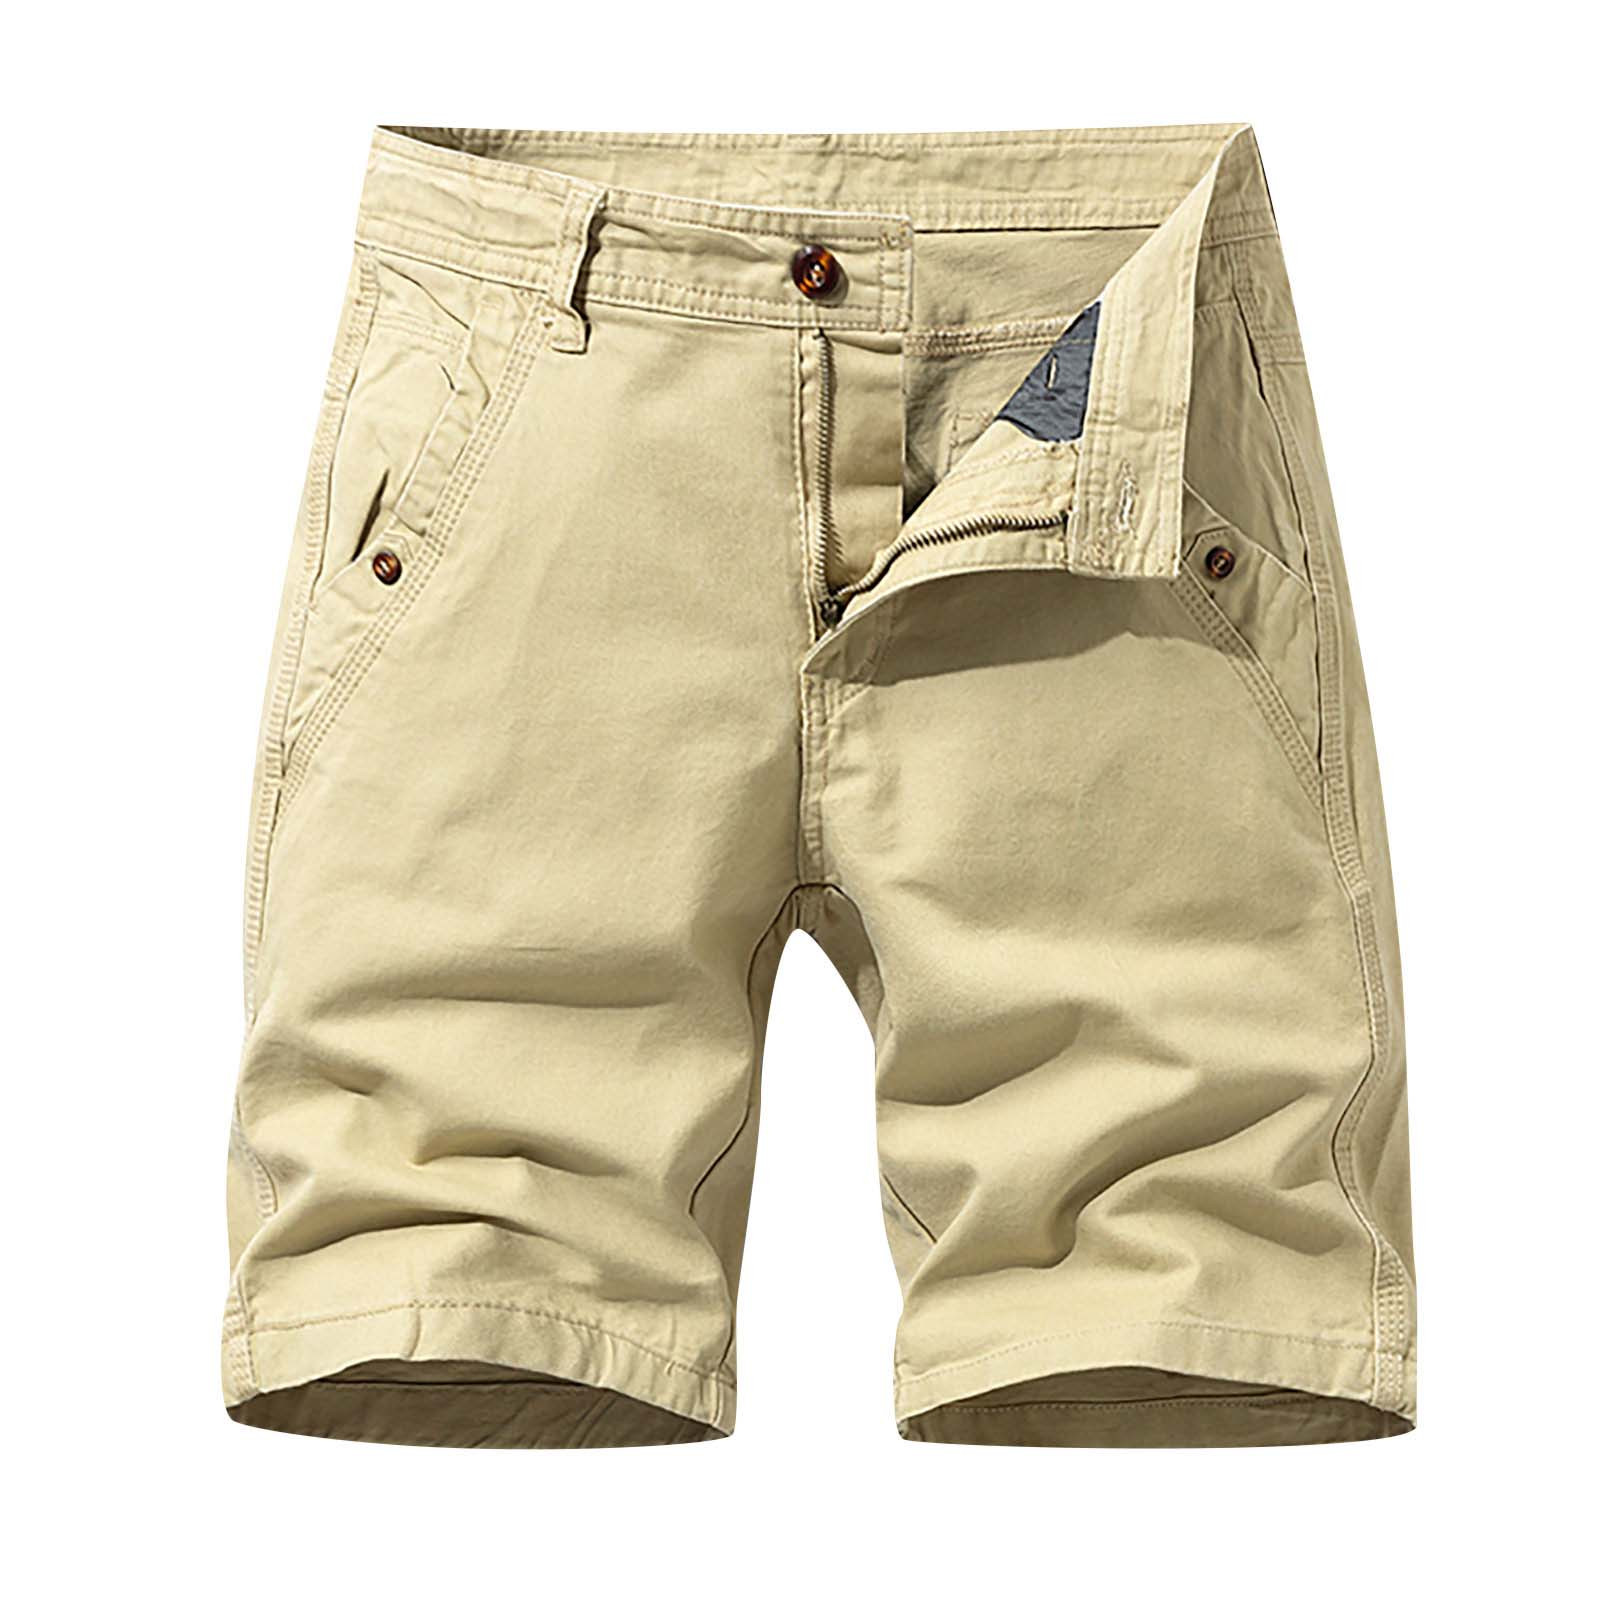 Men's Elastic Waist Cargo Shorts Casual Big and Tall Relaxed Fit ...